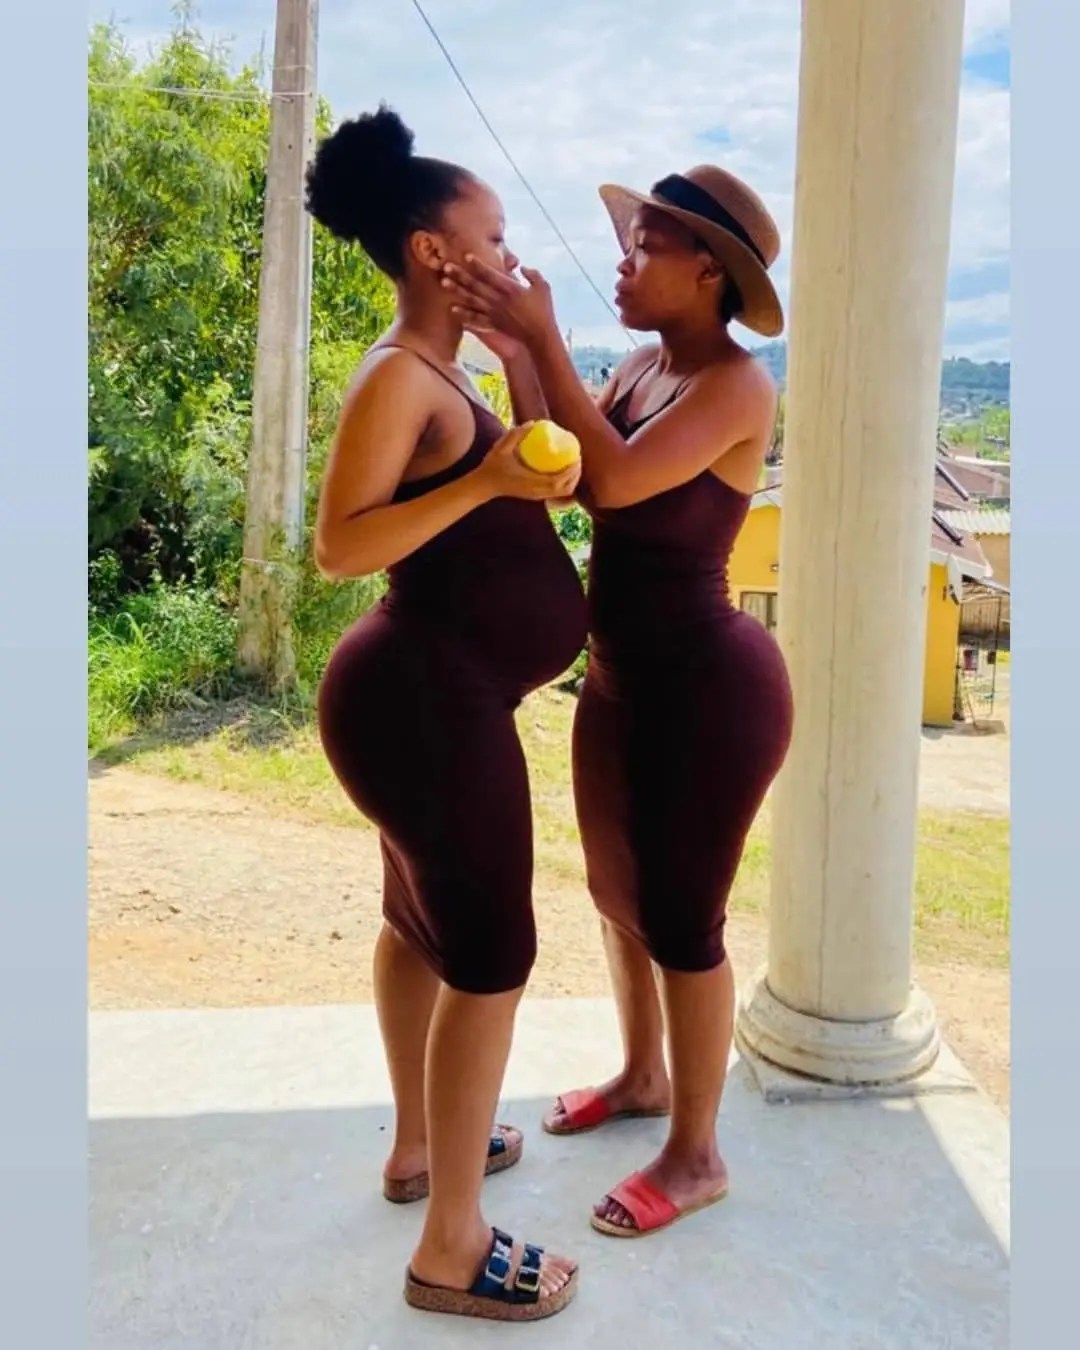 Former Idols SA star Neliswa Mxakaza speaks on becoming a parent and putting her wedding plans on hold